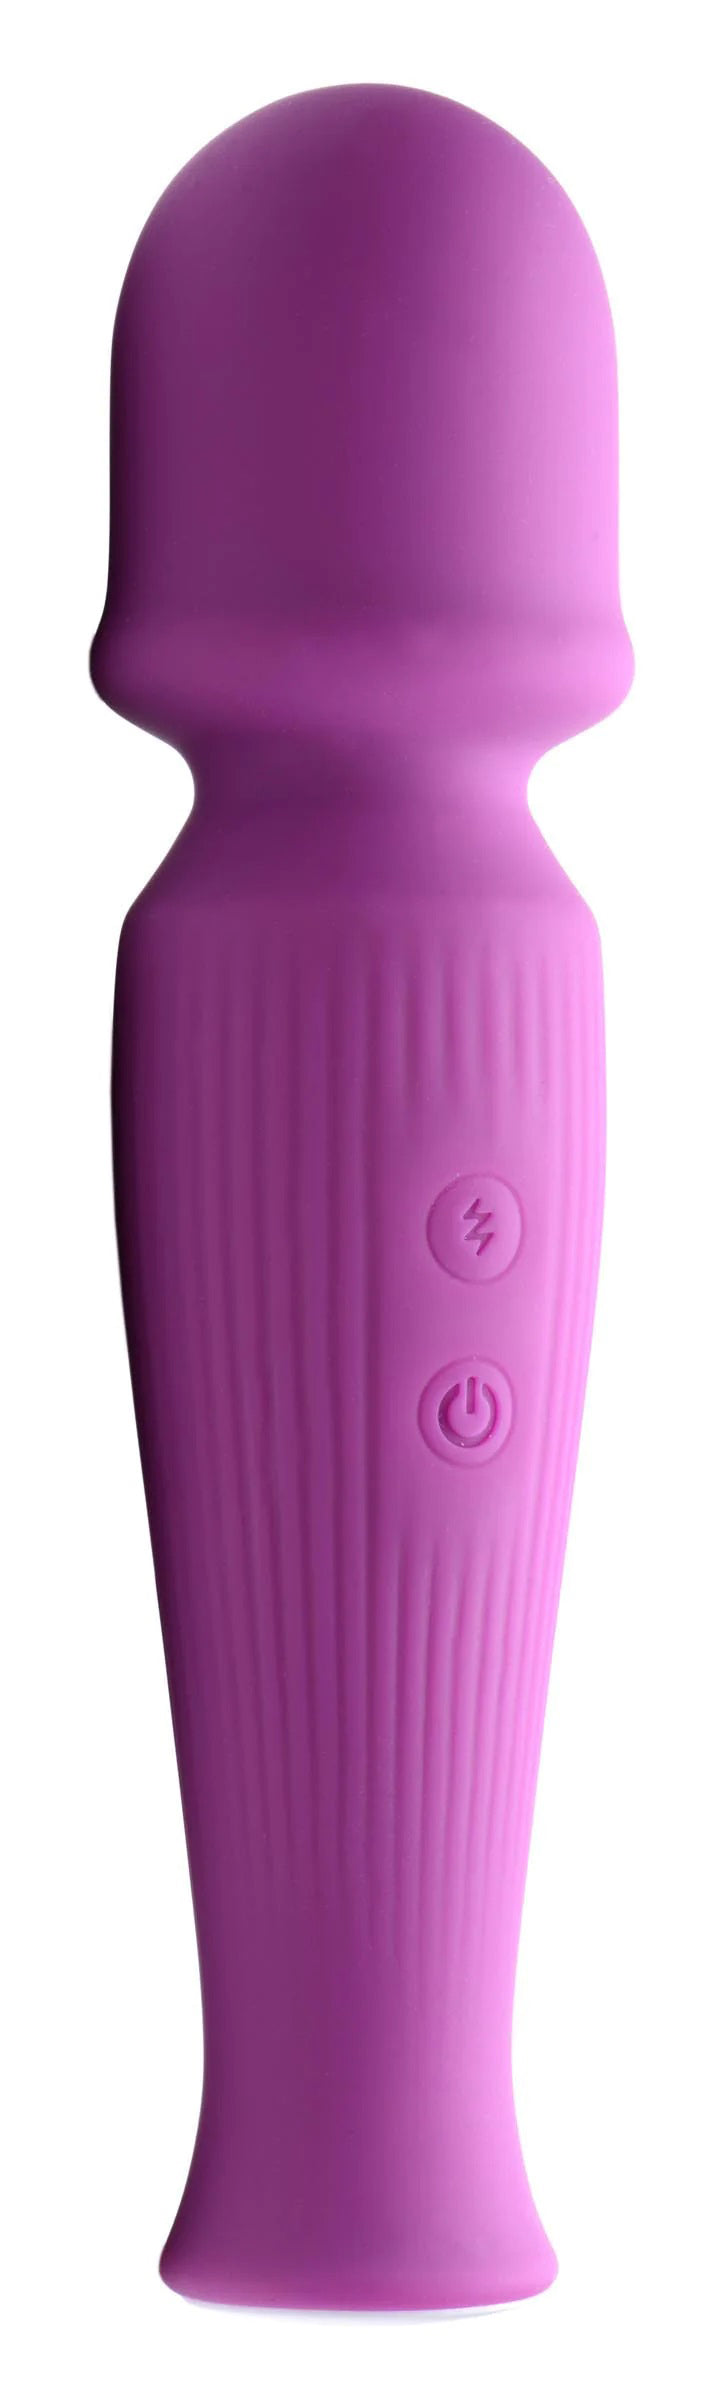 Silicone Wand Massager - Violet-3